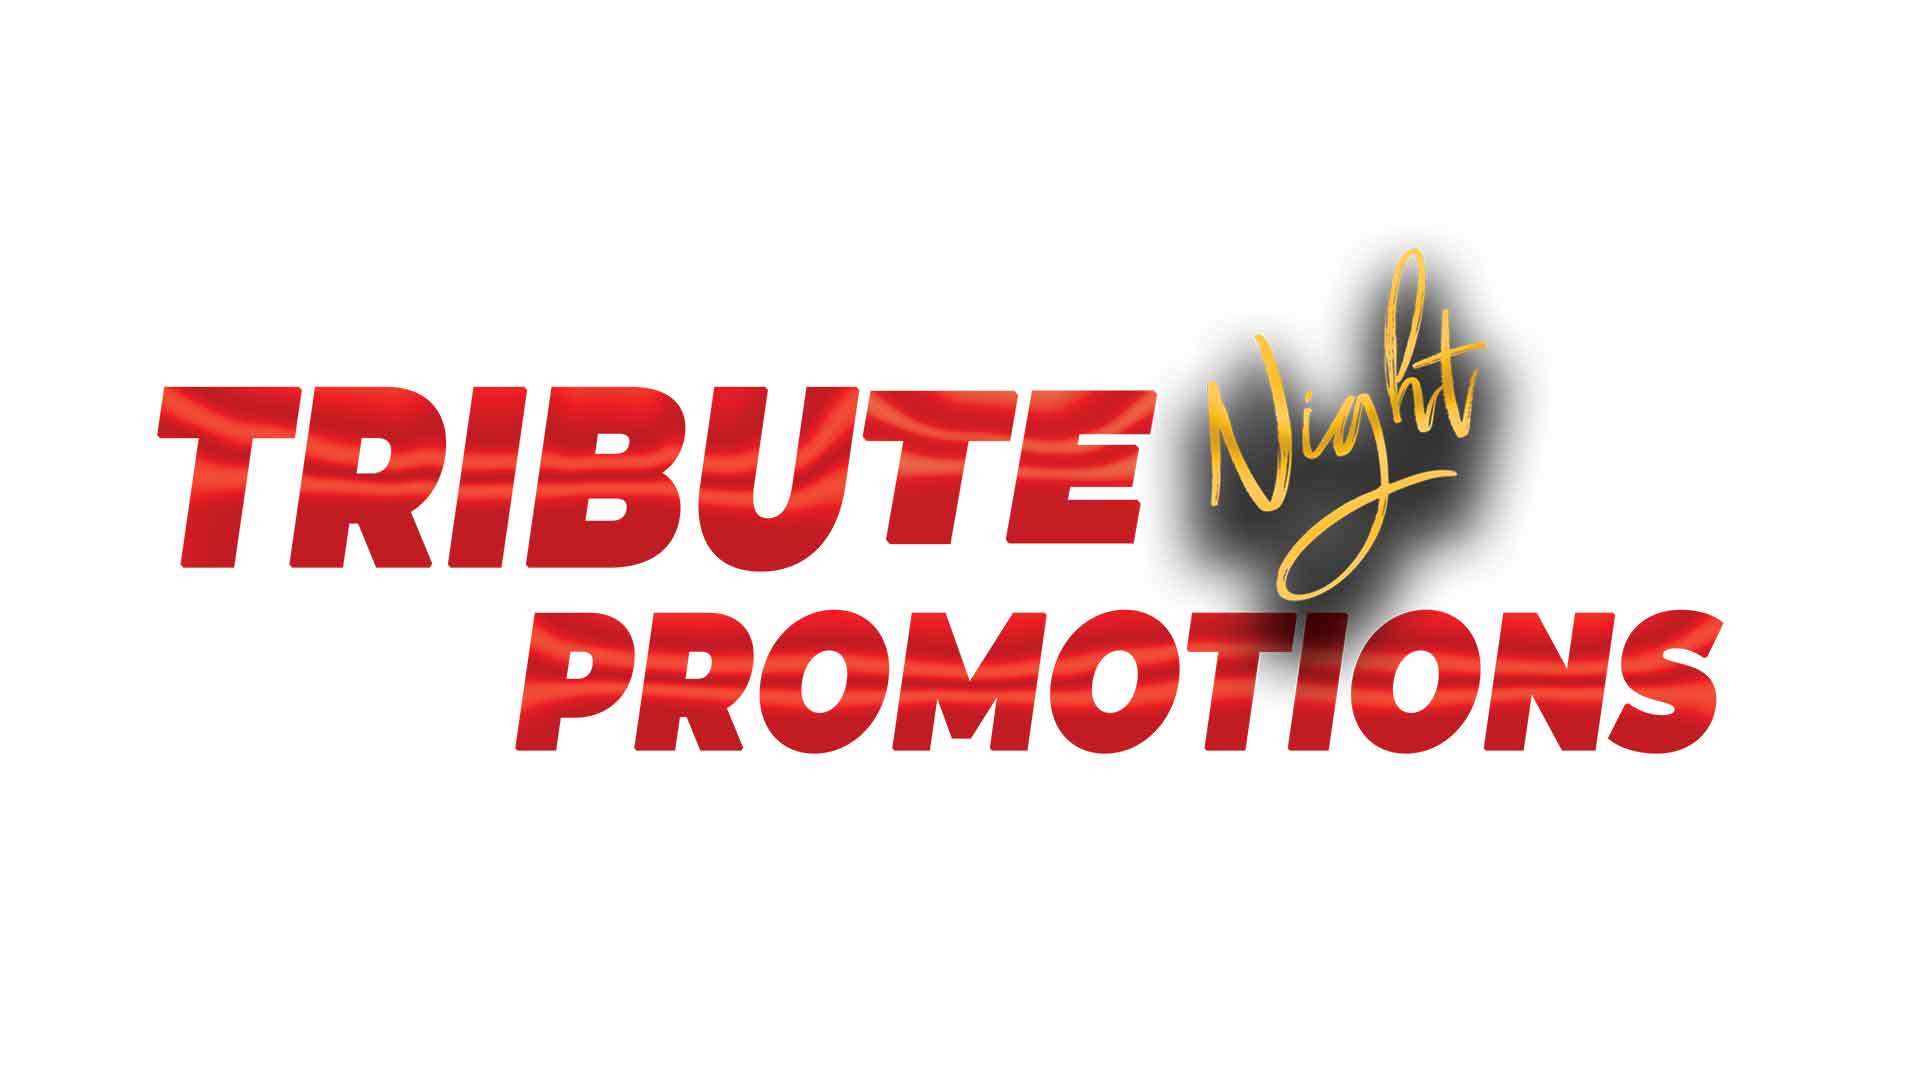 Tribute Night Promotions